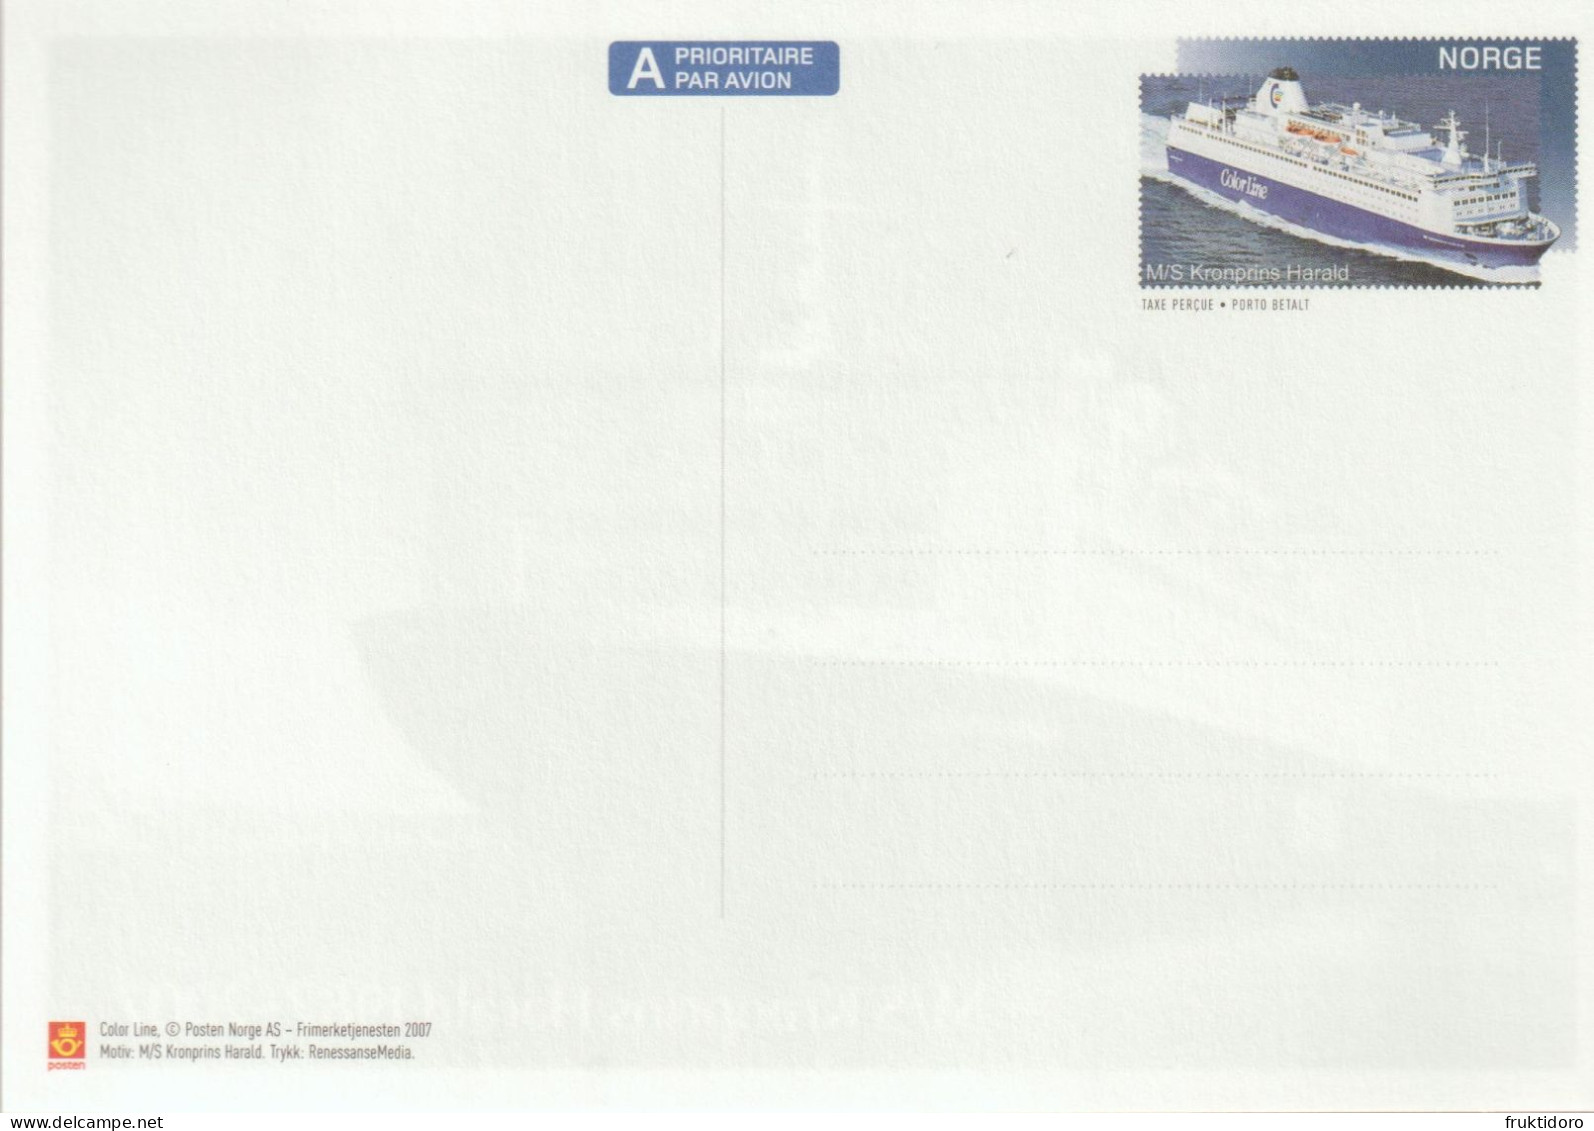 Norway Postal Stationery 2007 Ship M/S Crown Prince Haral 1987-2007 ** - Entiers Postaux